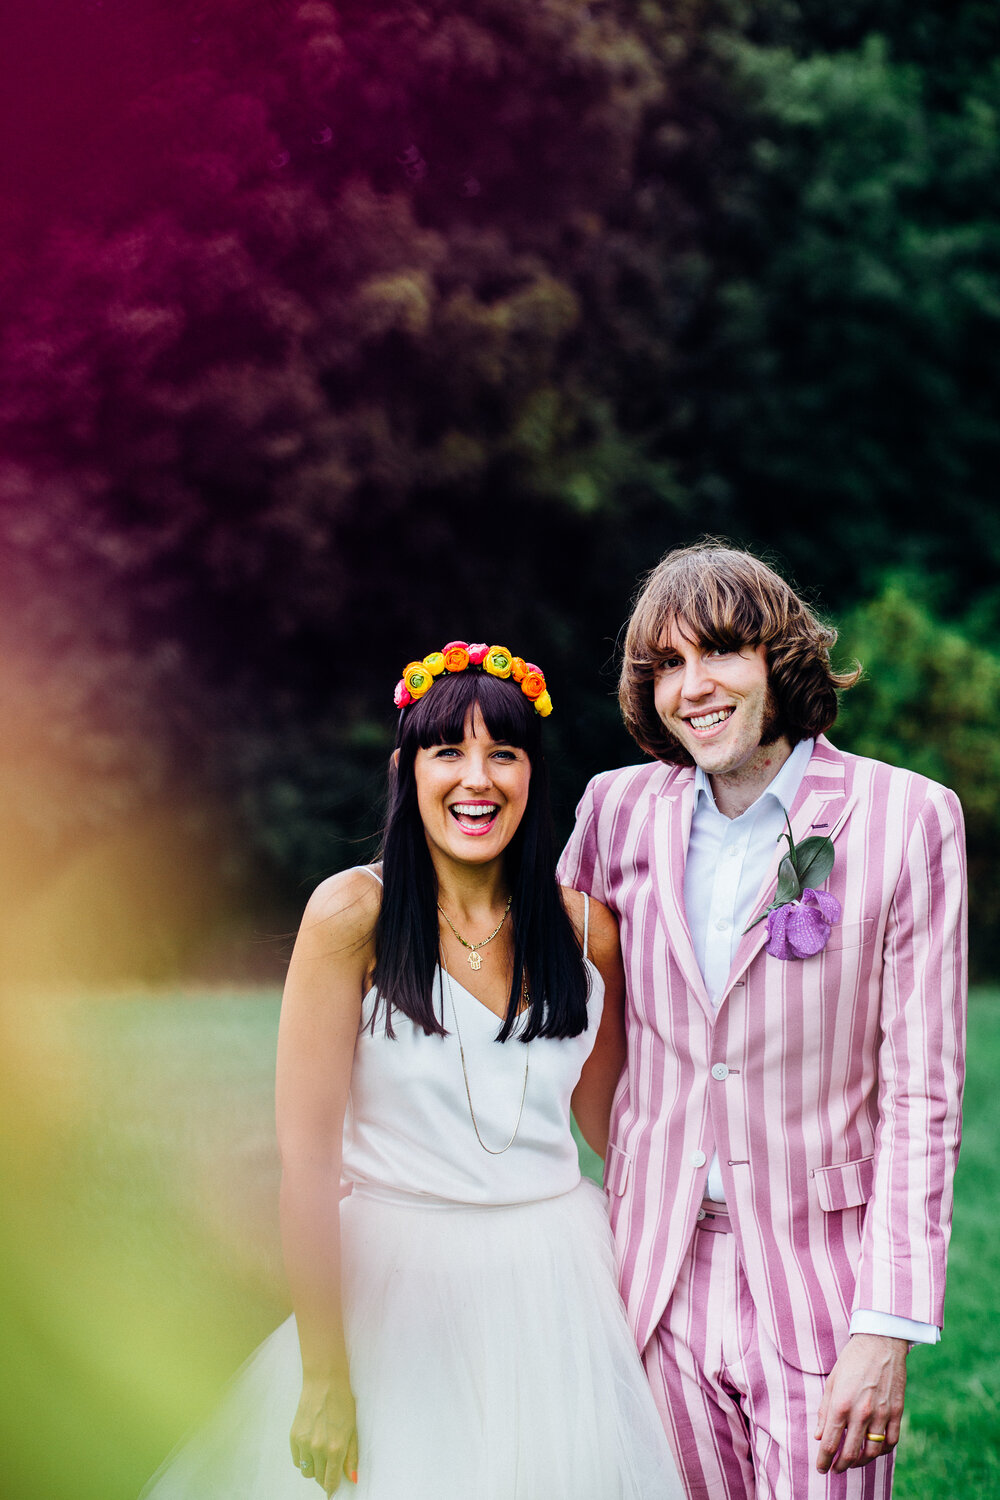 Colourful Wedding Photography Non-Traditional Striped Groom Suit